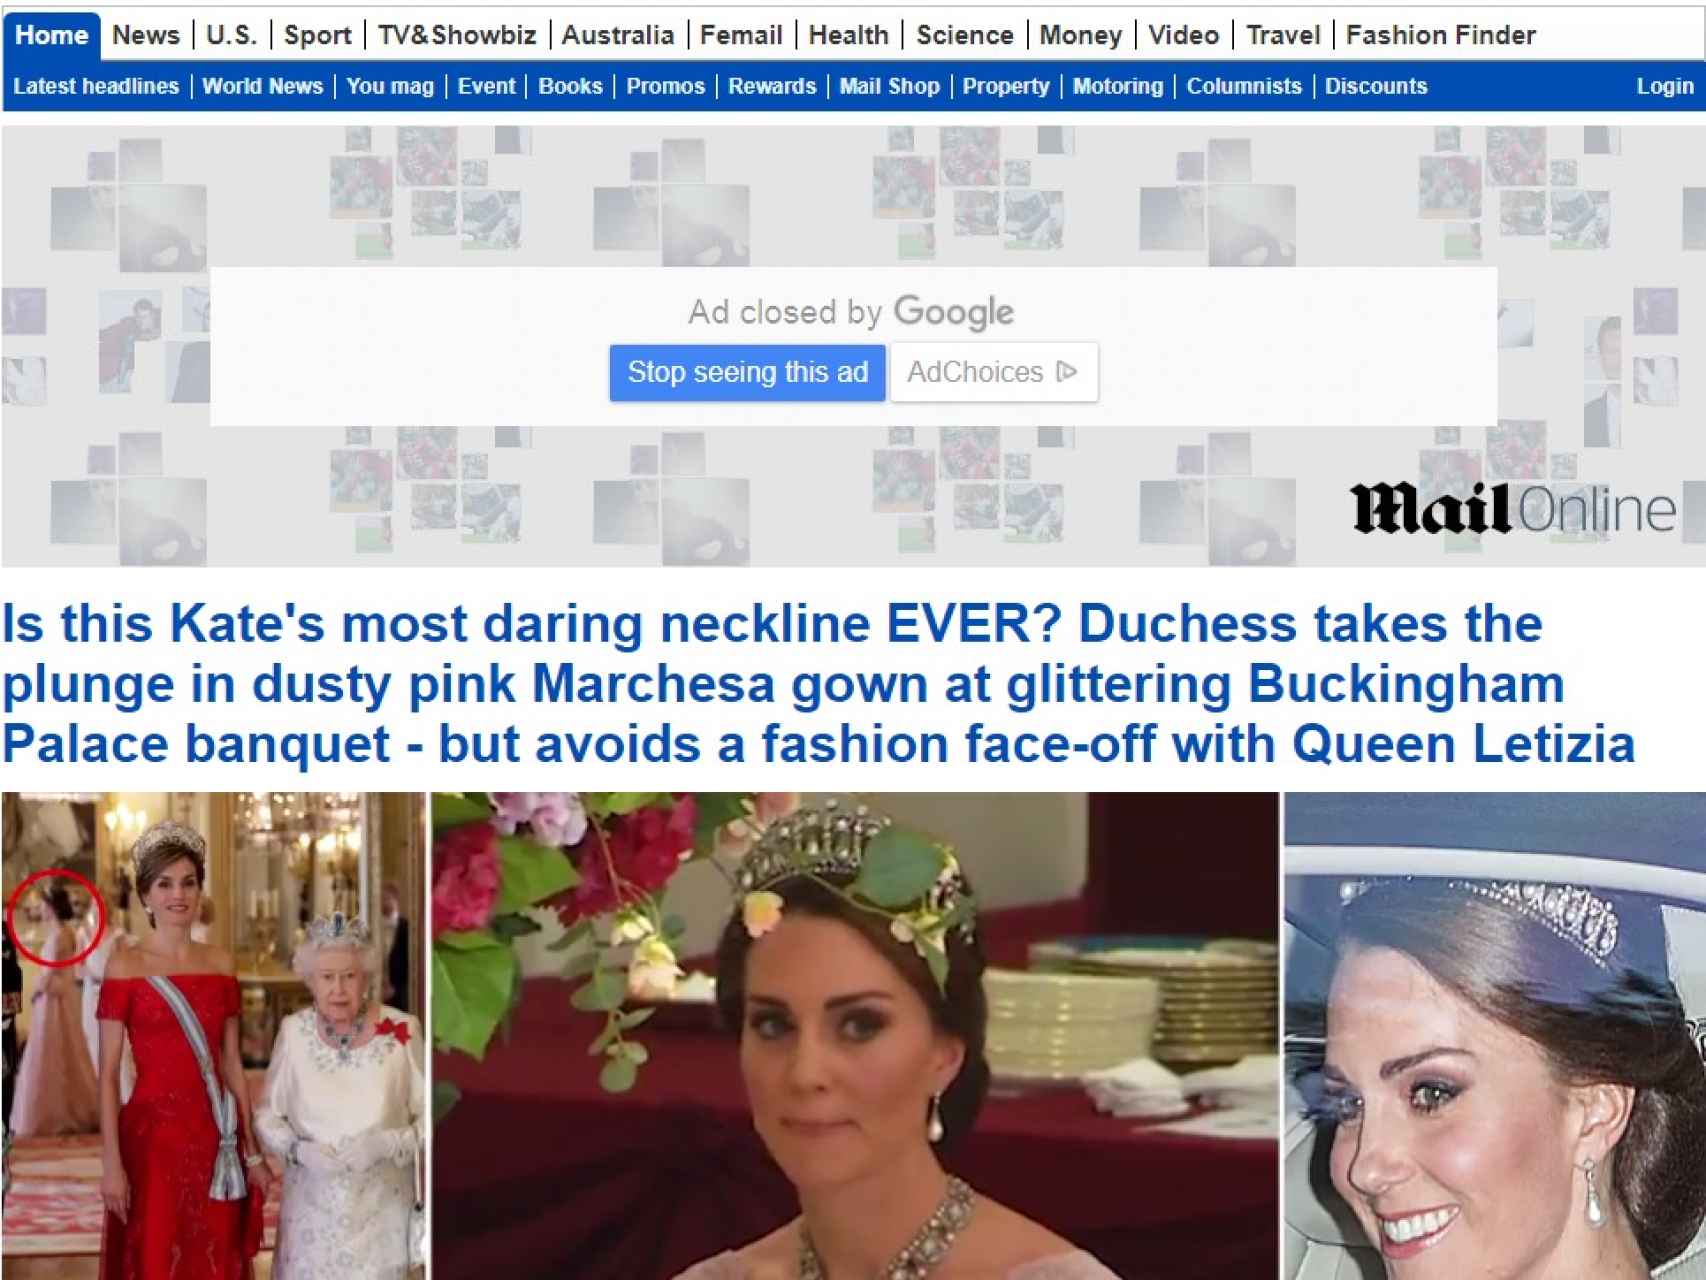 The Daily Mail.